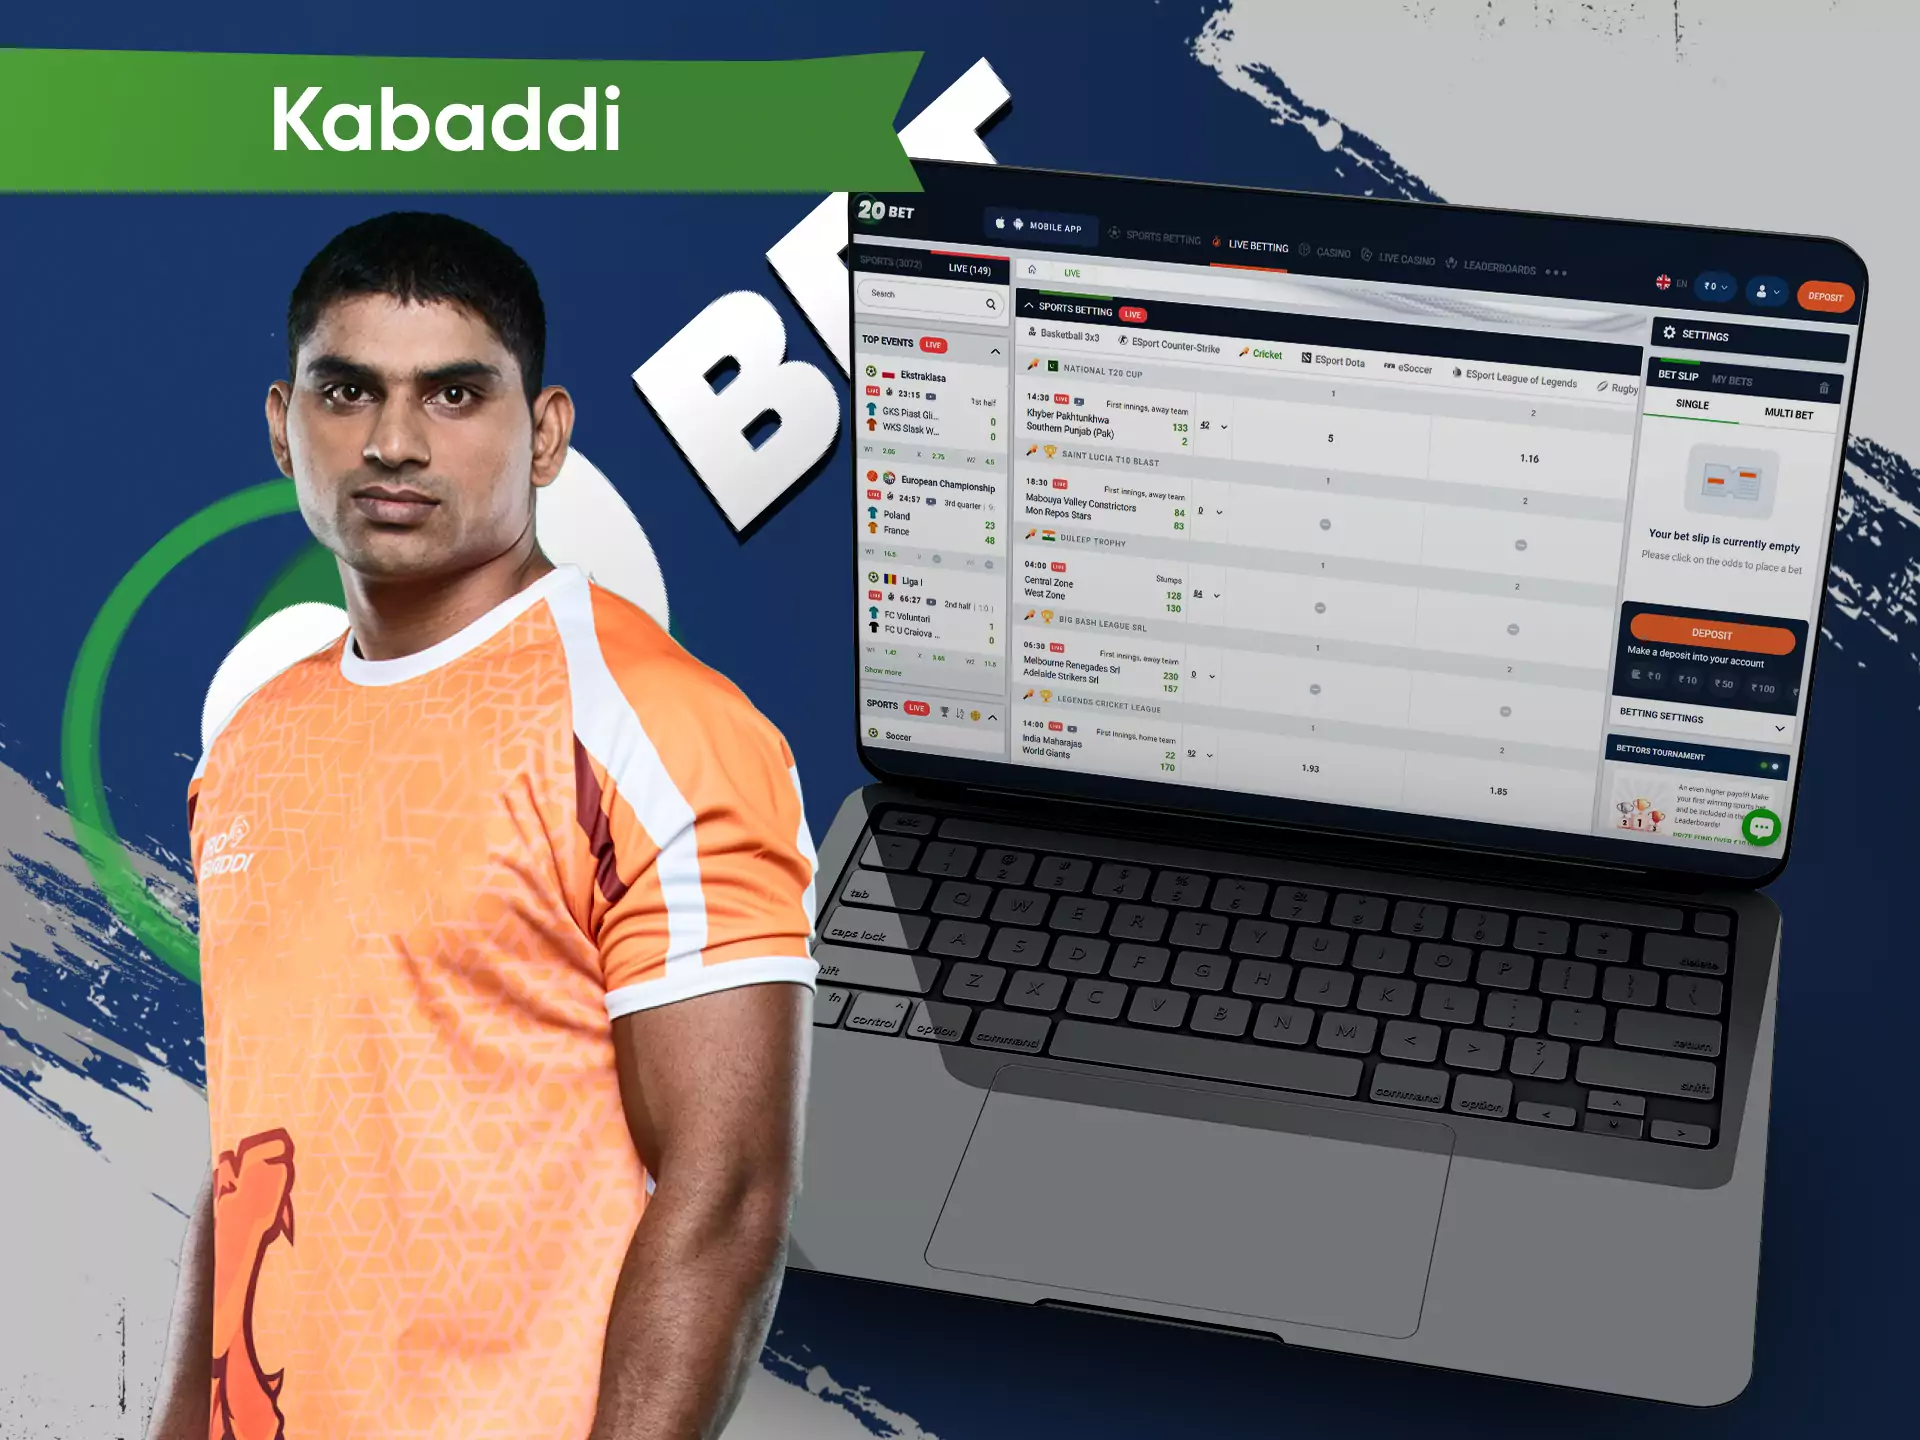 In the 20bet sportsbook, you can bet on kabaddi tournaments.